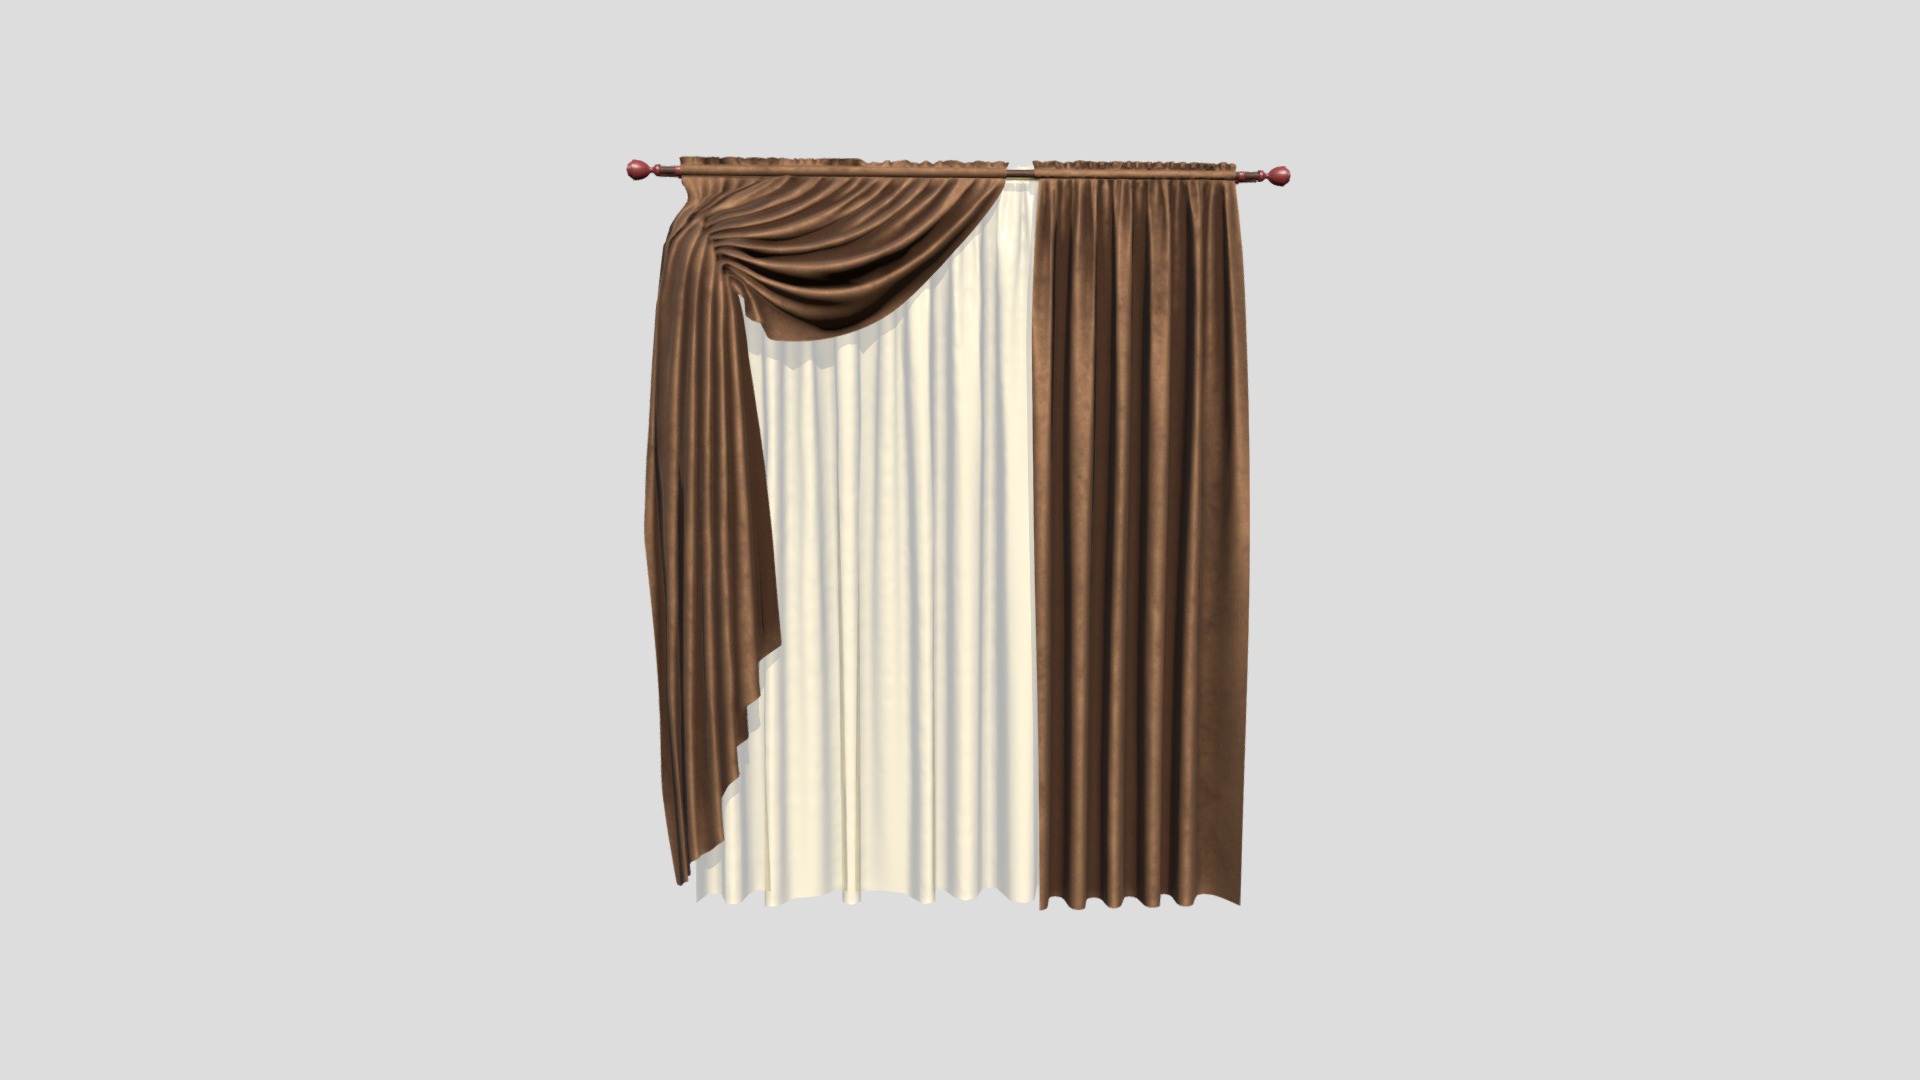 3D model №606 Curtain 3D low poly model for VR-projects - This is a 3D model of the №606 Curtain 3D low poly model for VR-projects. The 3D model is about a brown and white striped cloth.